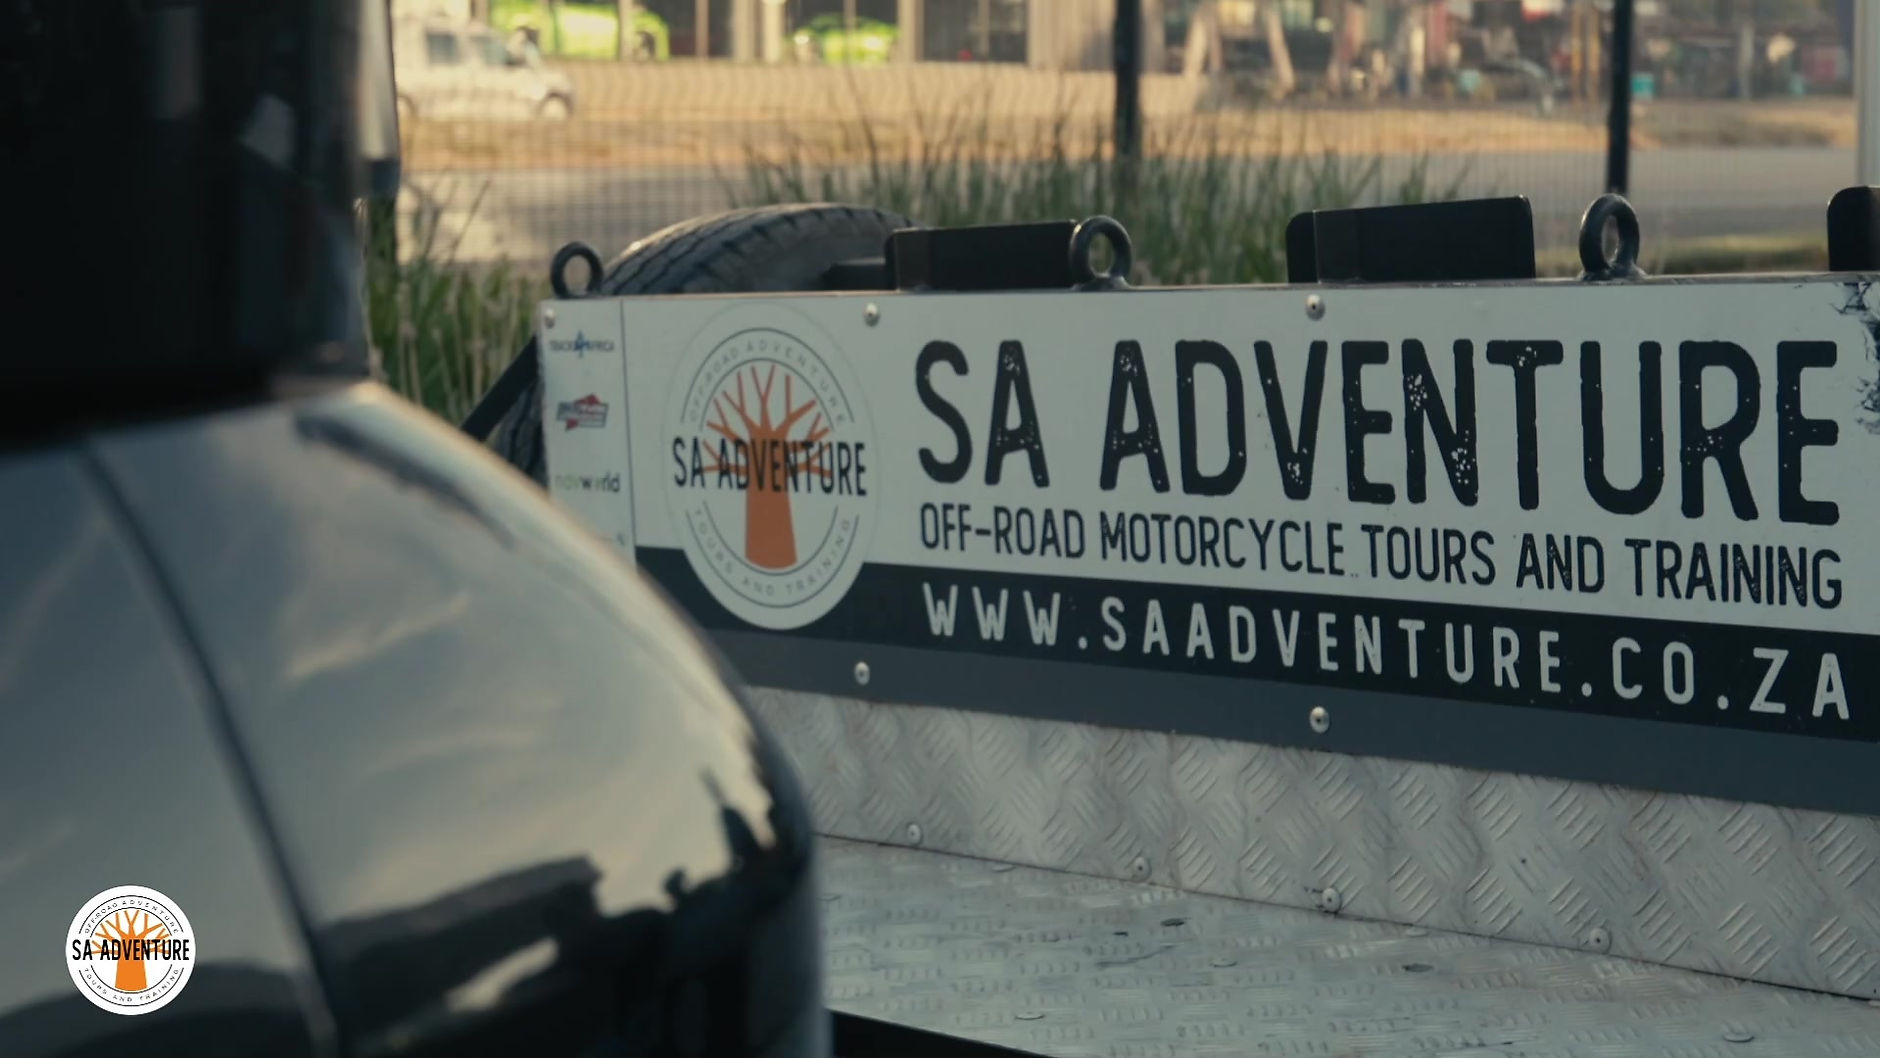 The Vredefort Dome Day Outride with BMW Motorrad Sandton